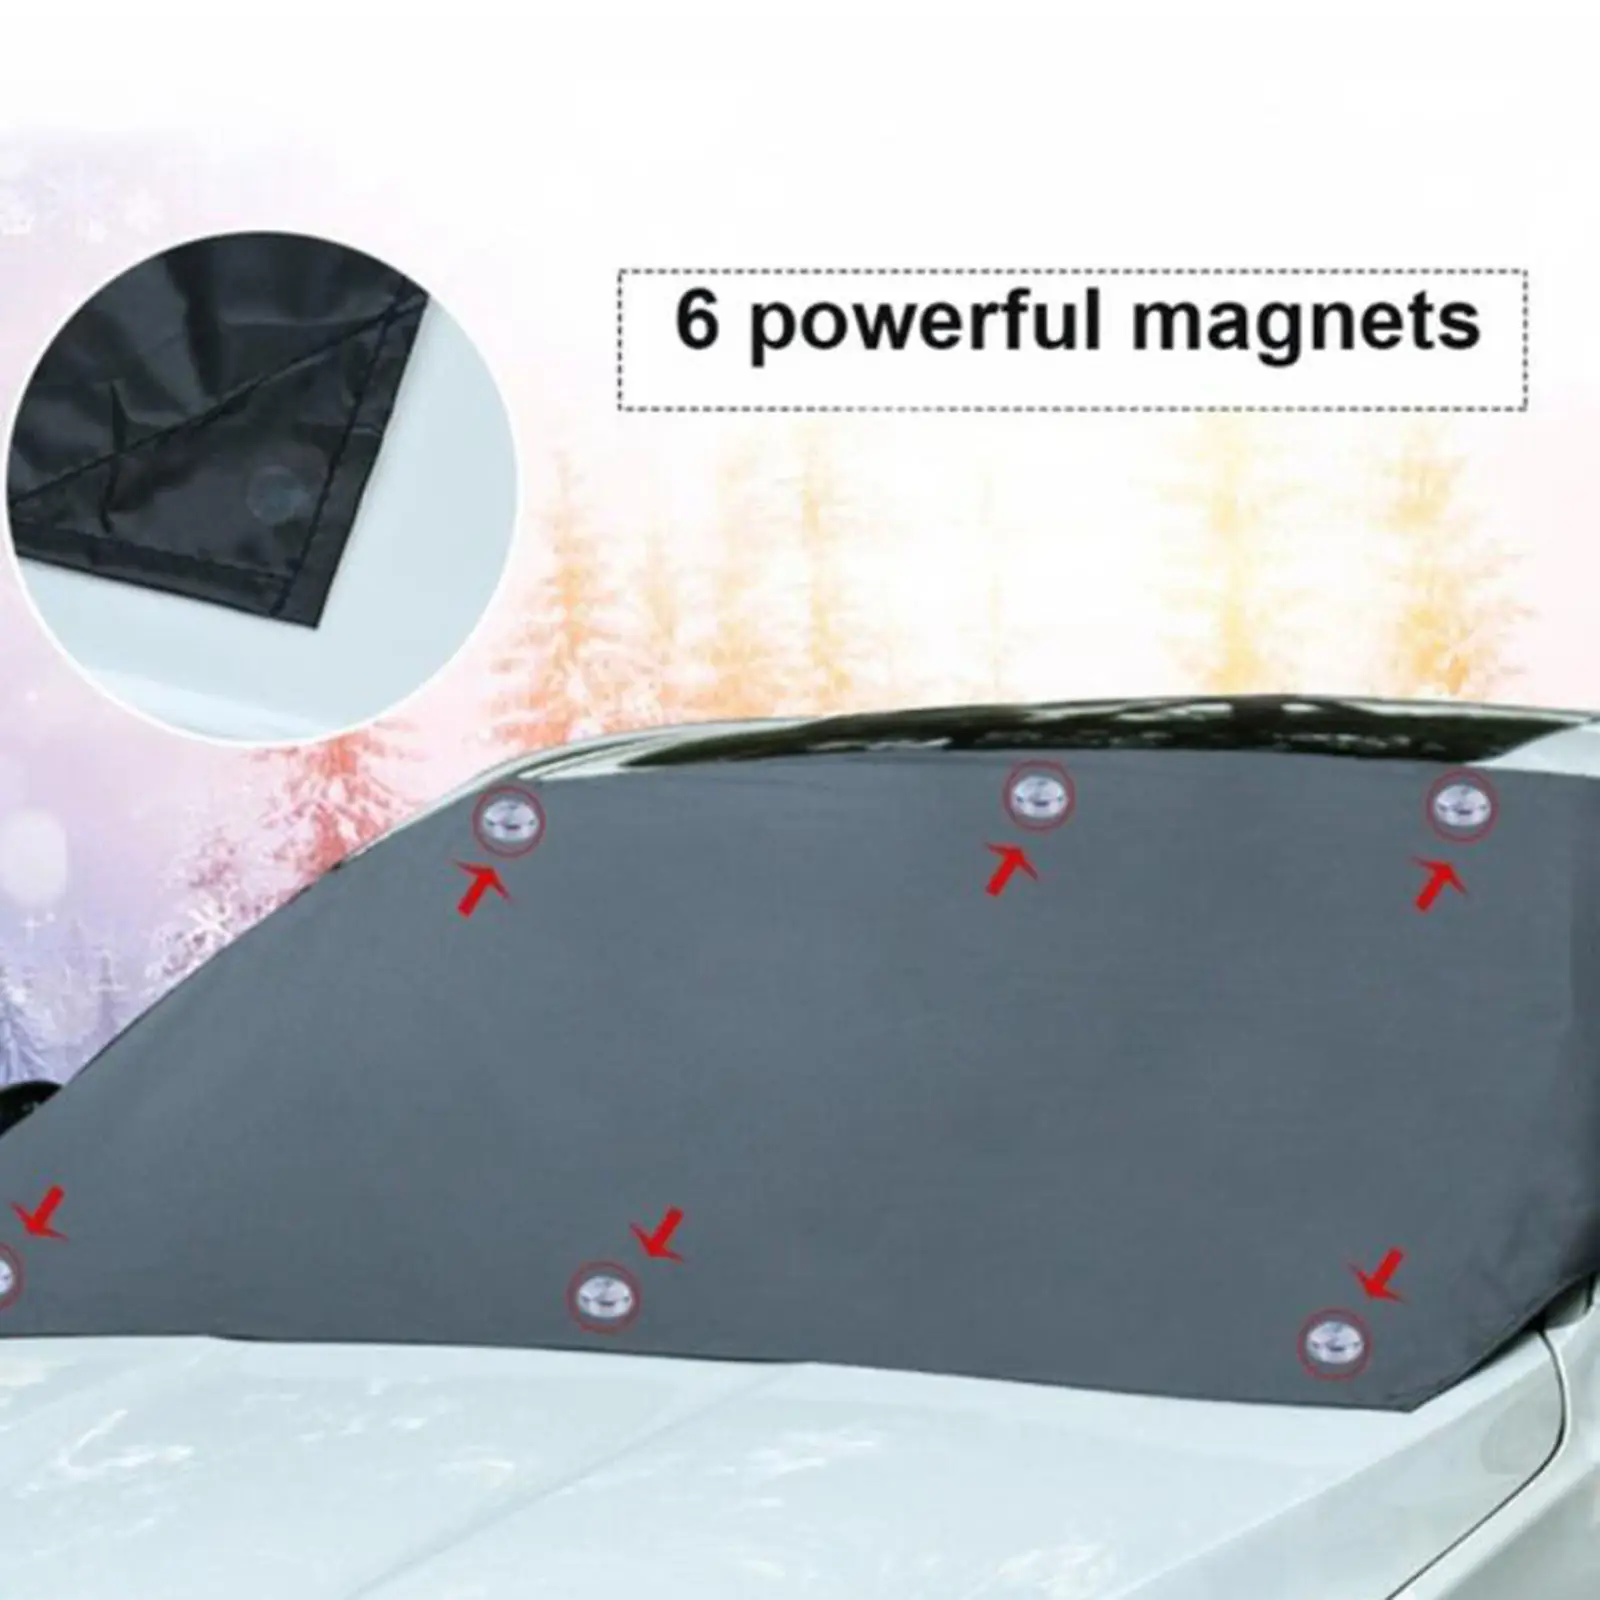 Car Snow Cover with  , Windshield Cover, Frost Guard, Windproof